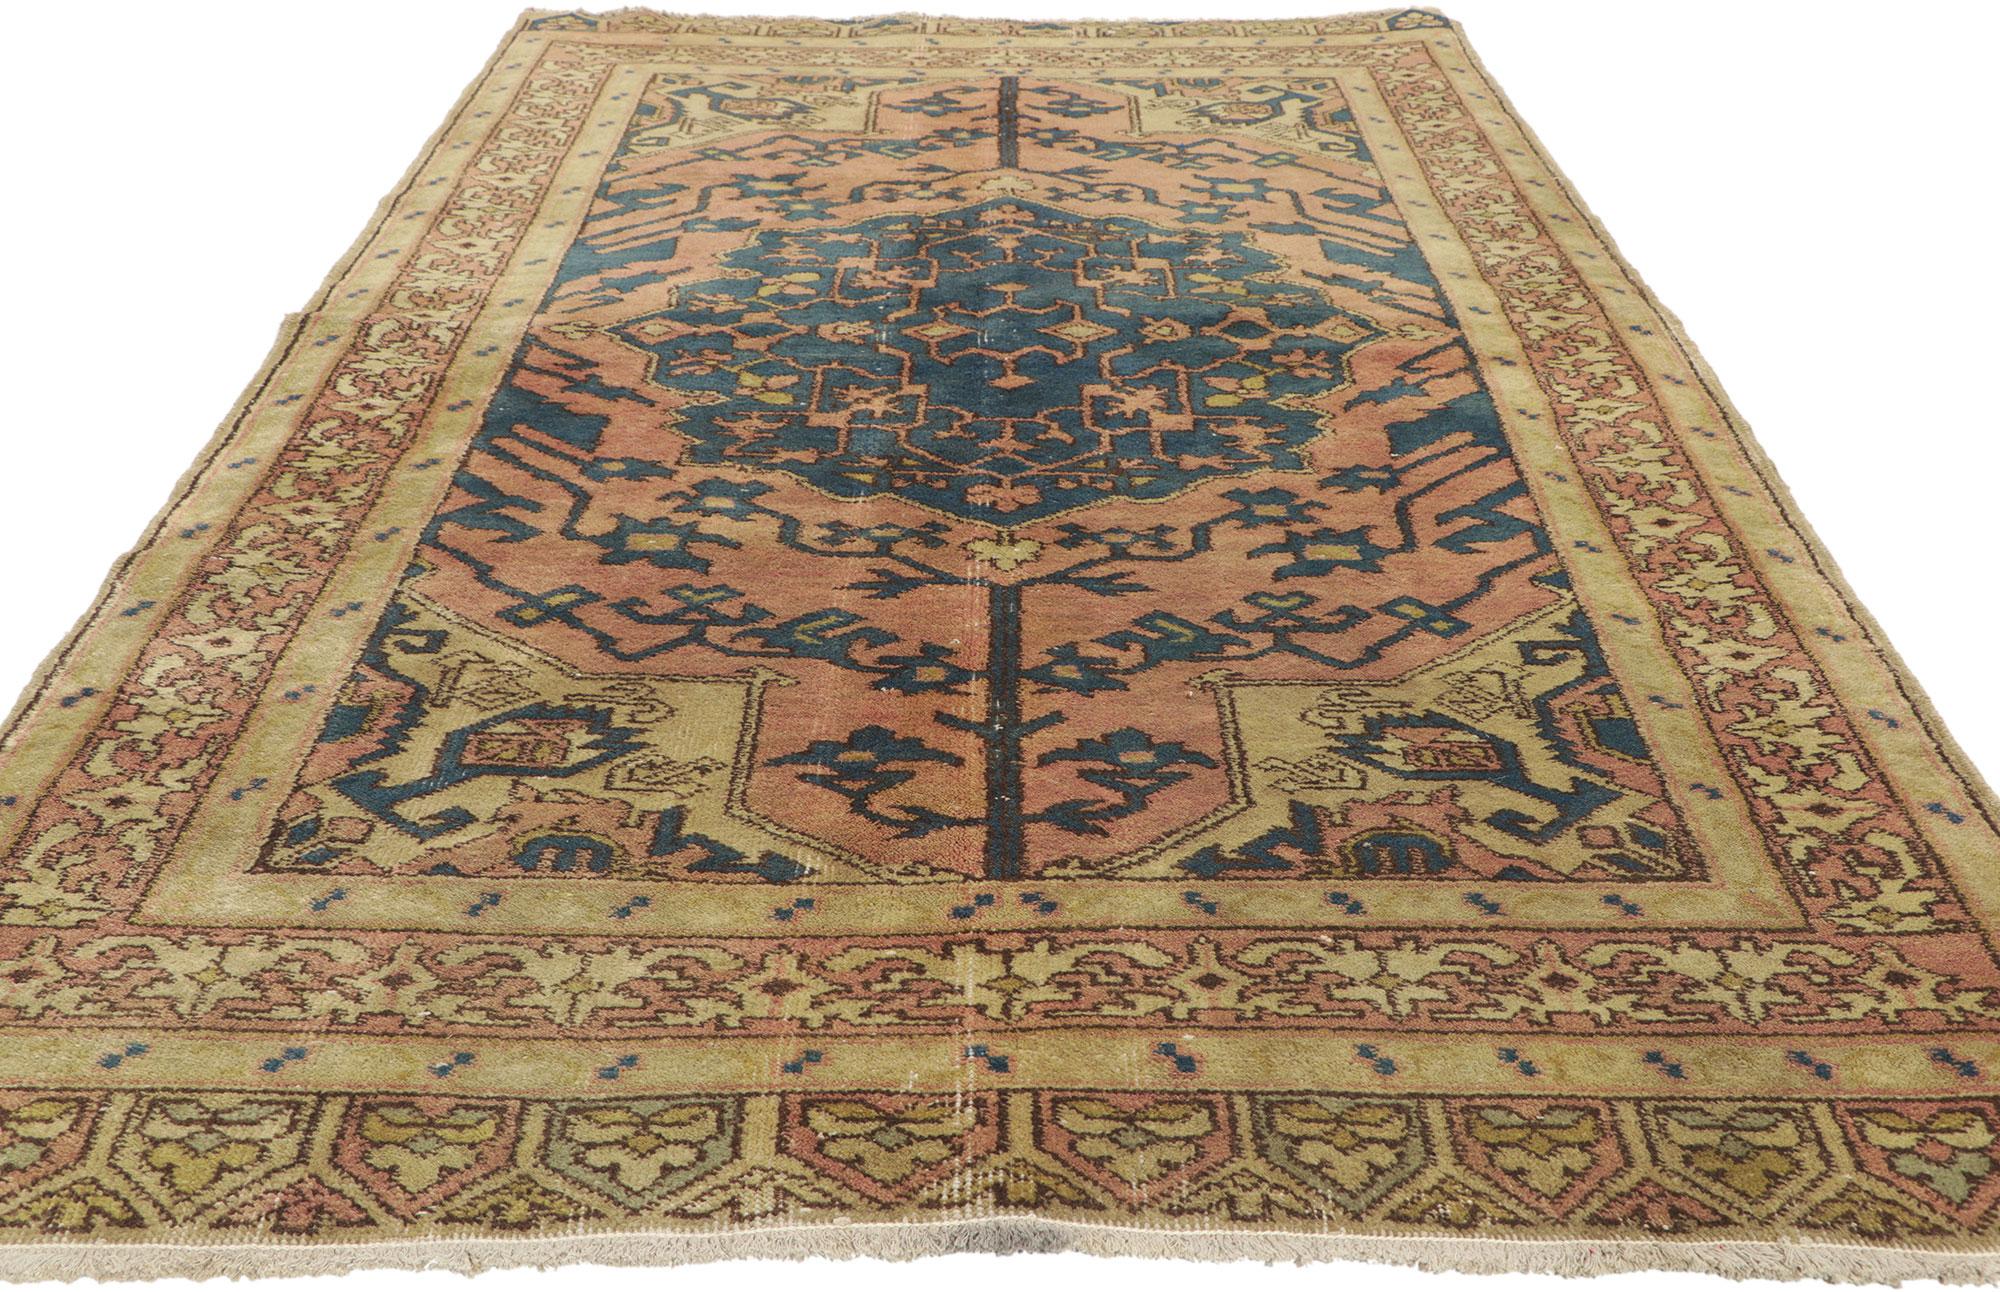 Pair of Matching Vintage Turkish Sivas Rugs with Rustic Earth-Tone Colors In Distressed Condition For Sale In Dallas, TX